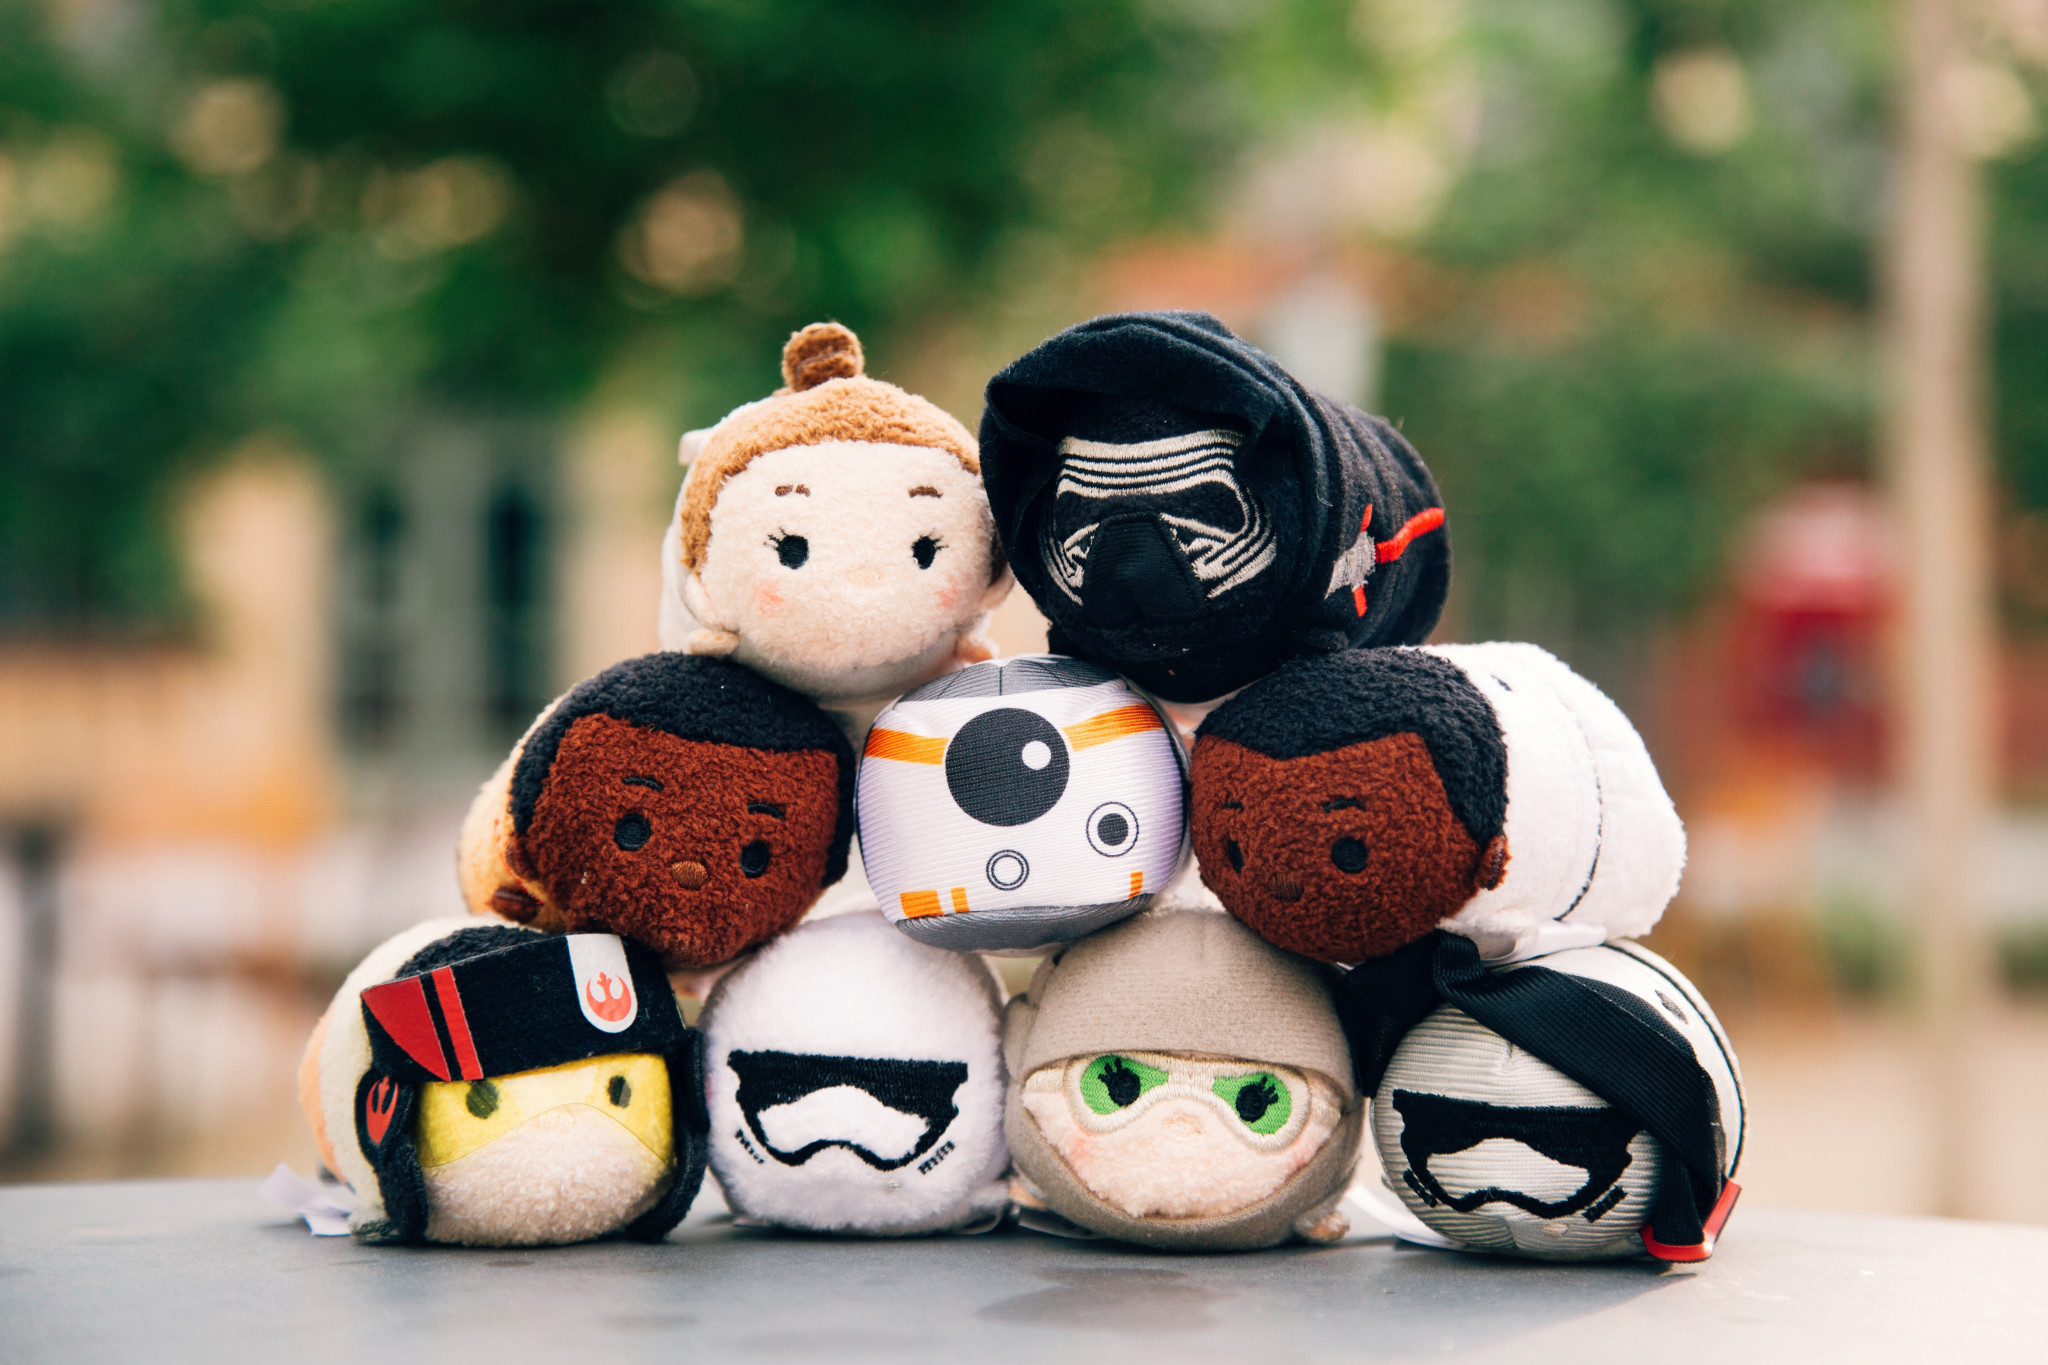 Star Wars: The Force Awakens Tsum Tsums Coming Soon